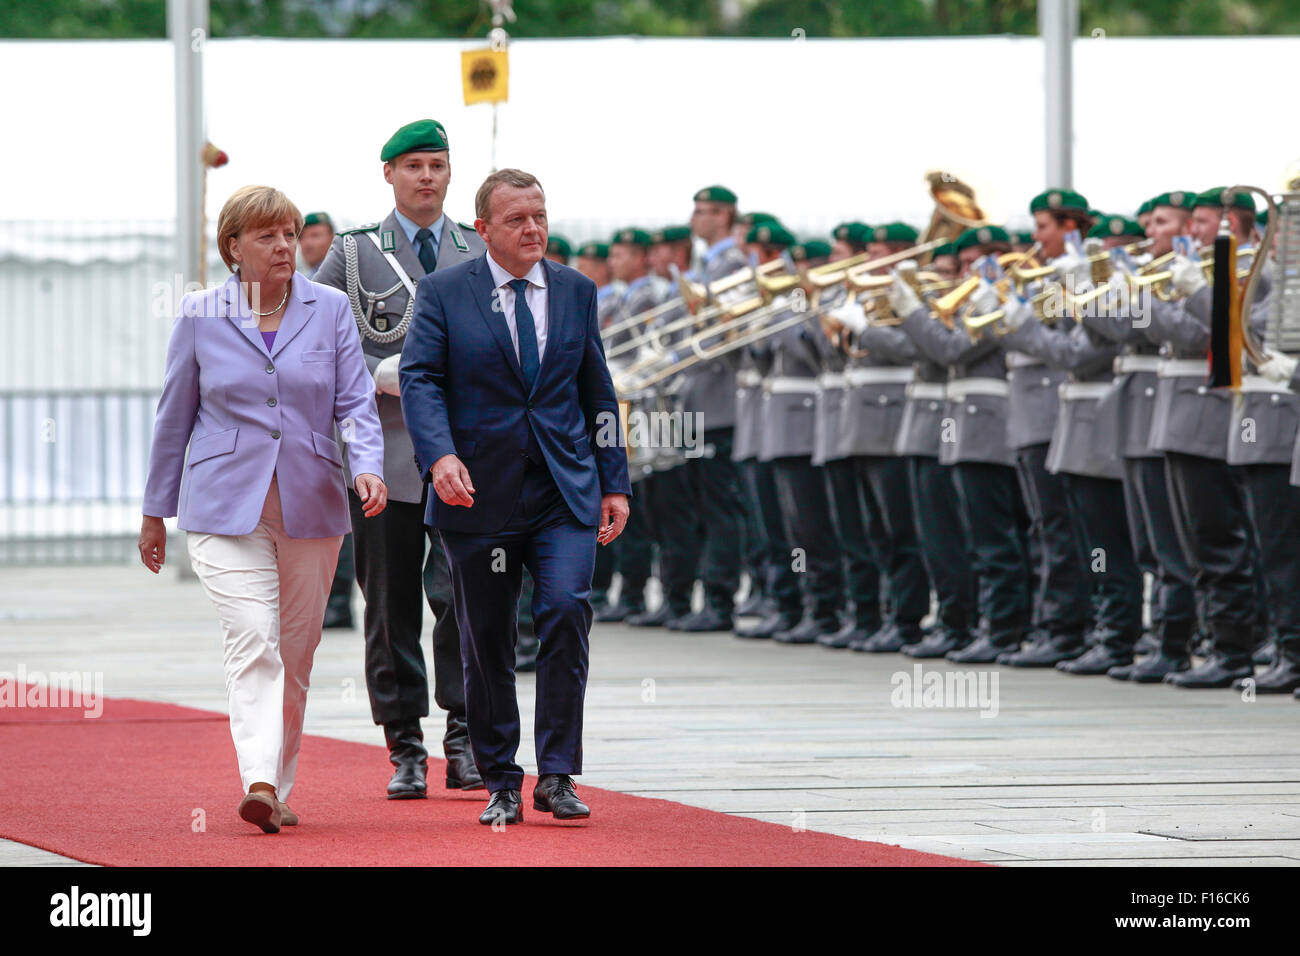 Berlin, Germany. 28th August, 2015. German Chancellor Angela Merkel welcomes Lars Løkke Rasmussen, Prime Minister of Denmark, with militar honors  at the German Chancellery in Berlin Germany on 28 August 2015. / Picture: German Chancellor Angela Merkel and Lars Løkke Rasmussen, Prime Minister of Denmark. Credit:  Reynaldo Chaib Paganelli/Alamy Live News Stock Photo